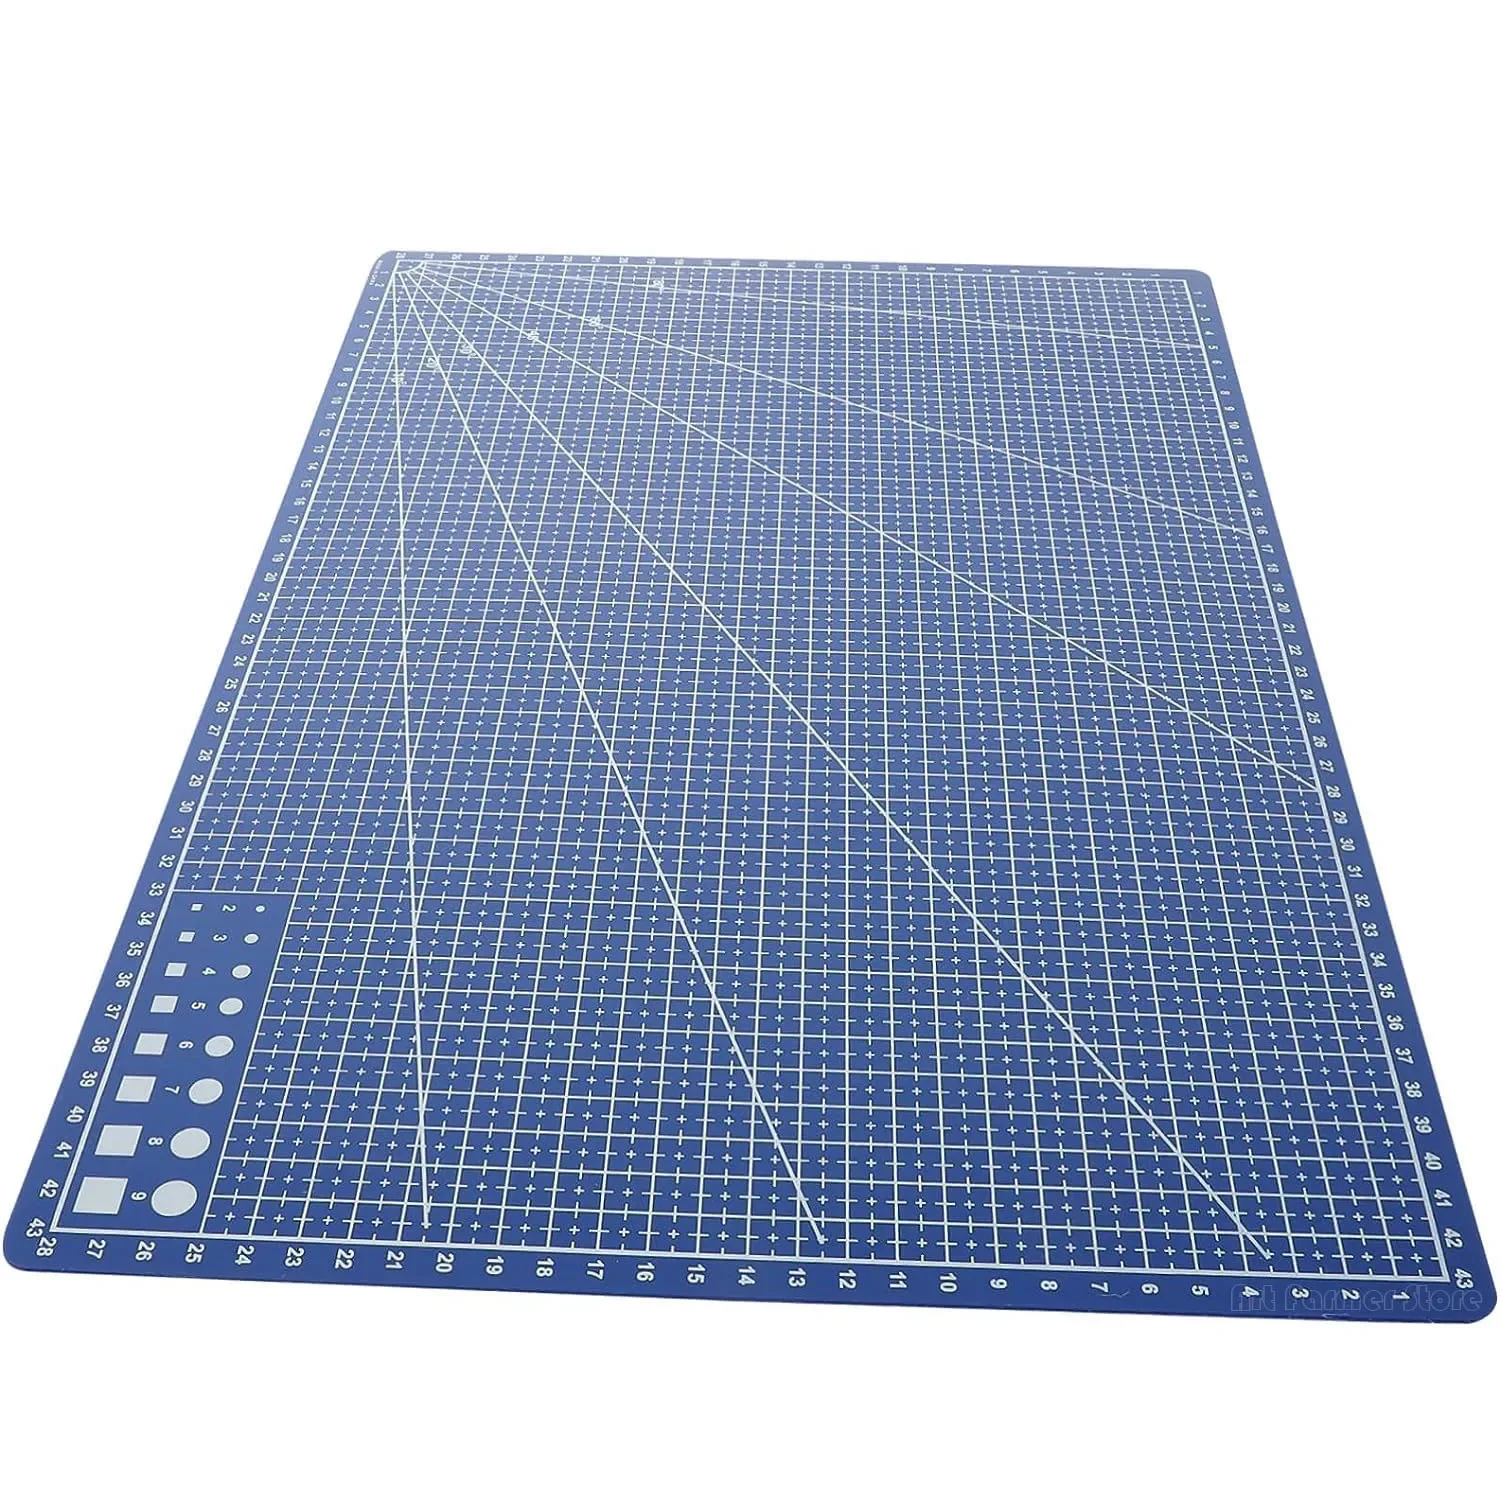 A3 A4 A5 PVC Cutting Mat Patchwork Cut Pad for Workbench Patchwork Sewing Manual DIY Knife Engraving Leather Cutting Board